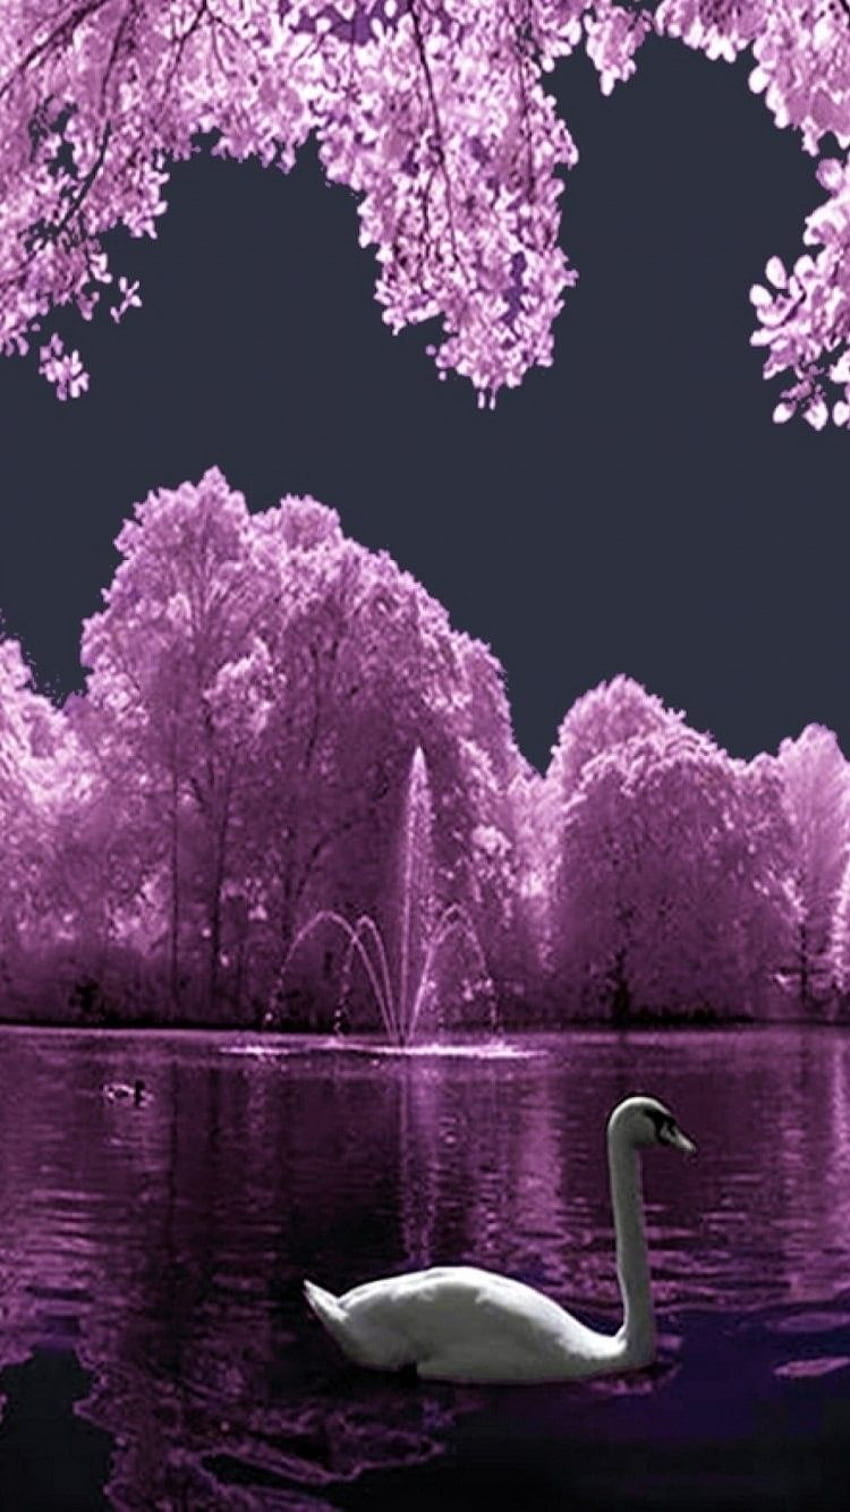 Two birds, tree, art picture 640x1136 iPhone 5/5S/5C/SE wallpaper,  background, picture, image